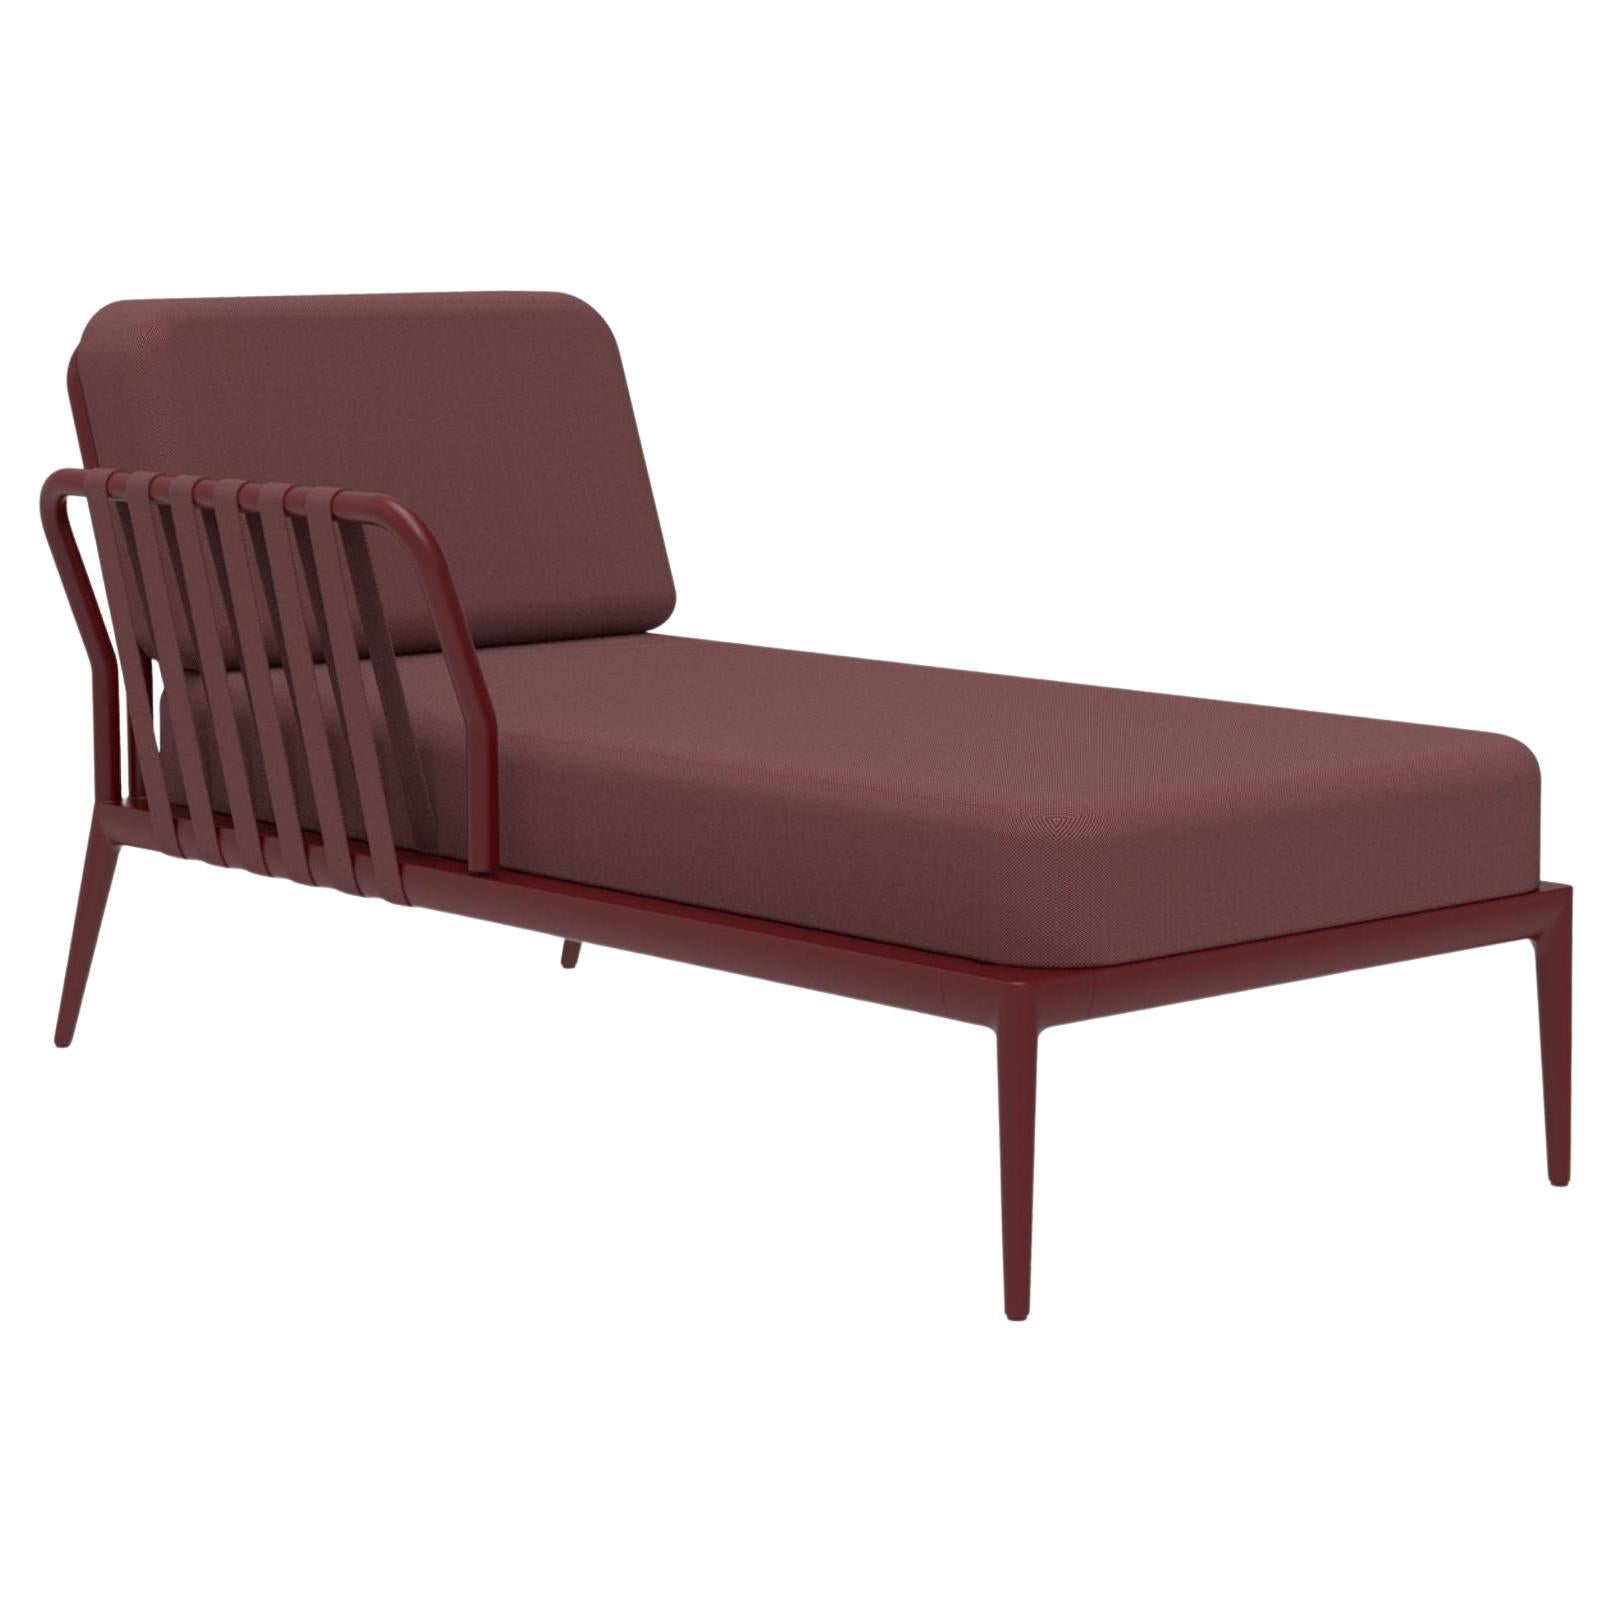 Ribbons Burgundy Right Chaise Longue by MOWEE